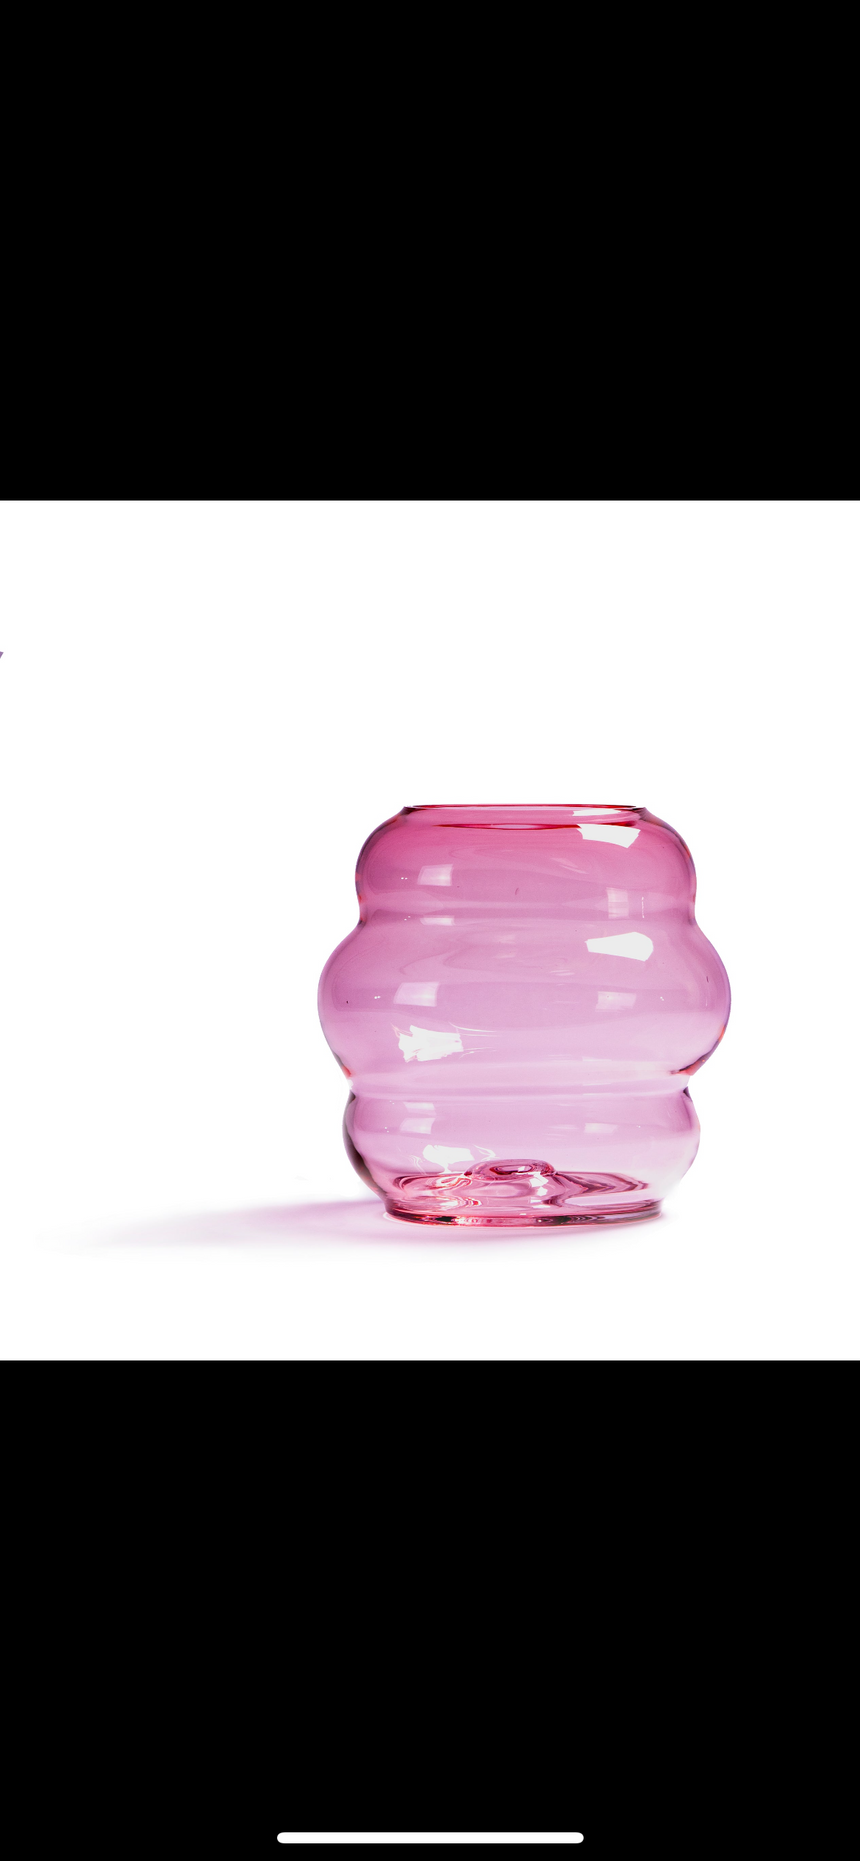 MARSANO 'Muse' Collection Vase - Berry / M